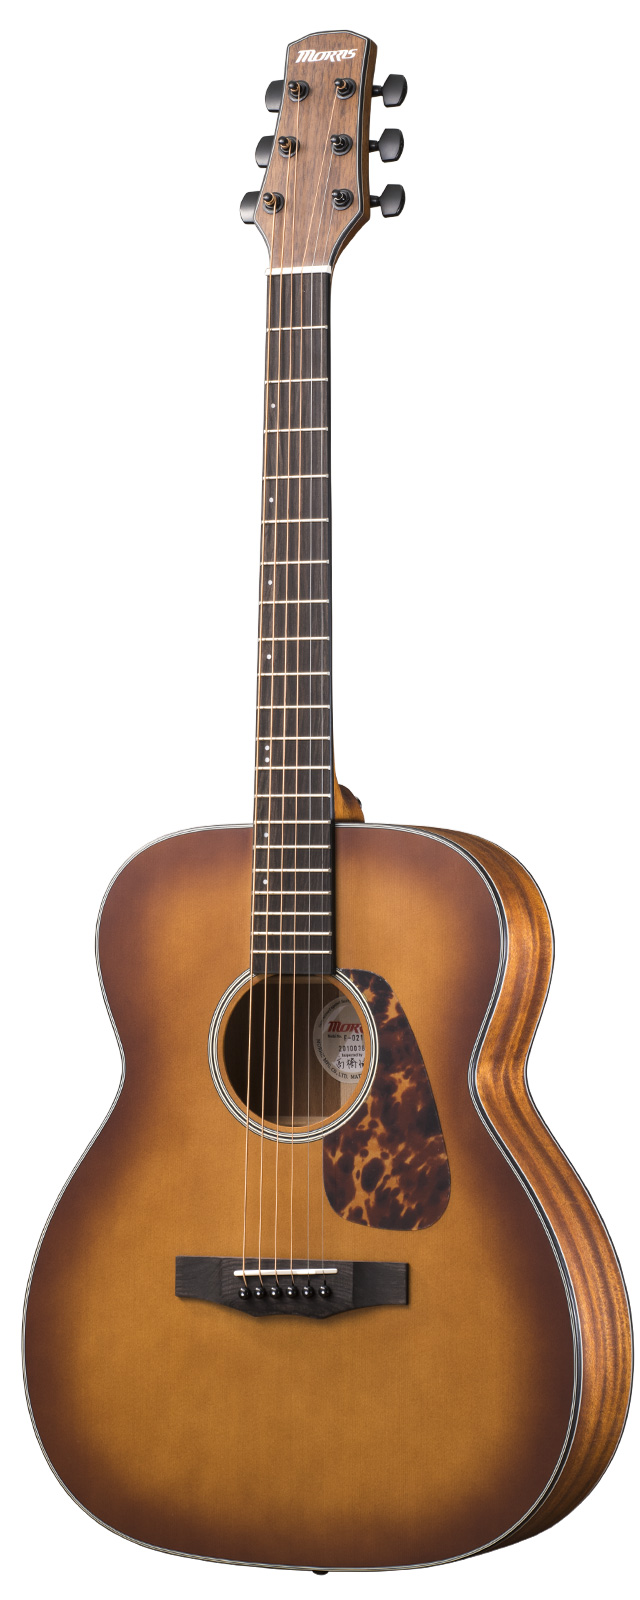 F-021 | PERFORMERS EDITION | MORRIS GUITARS モーリスギター